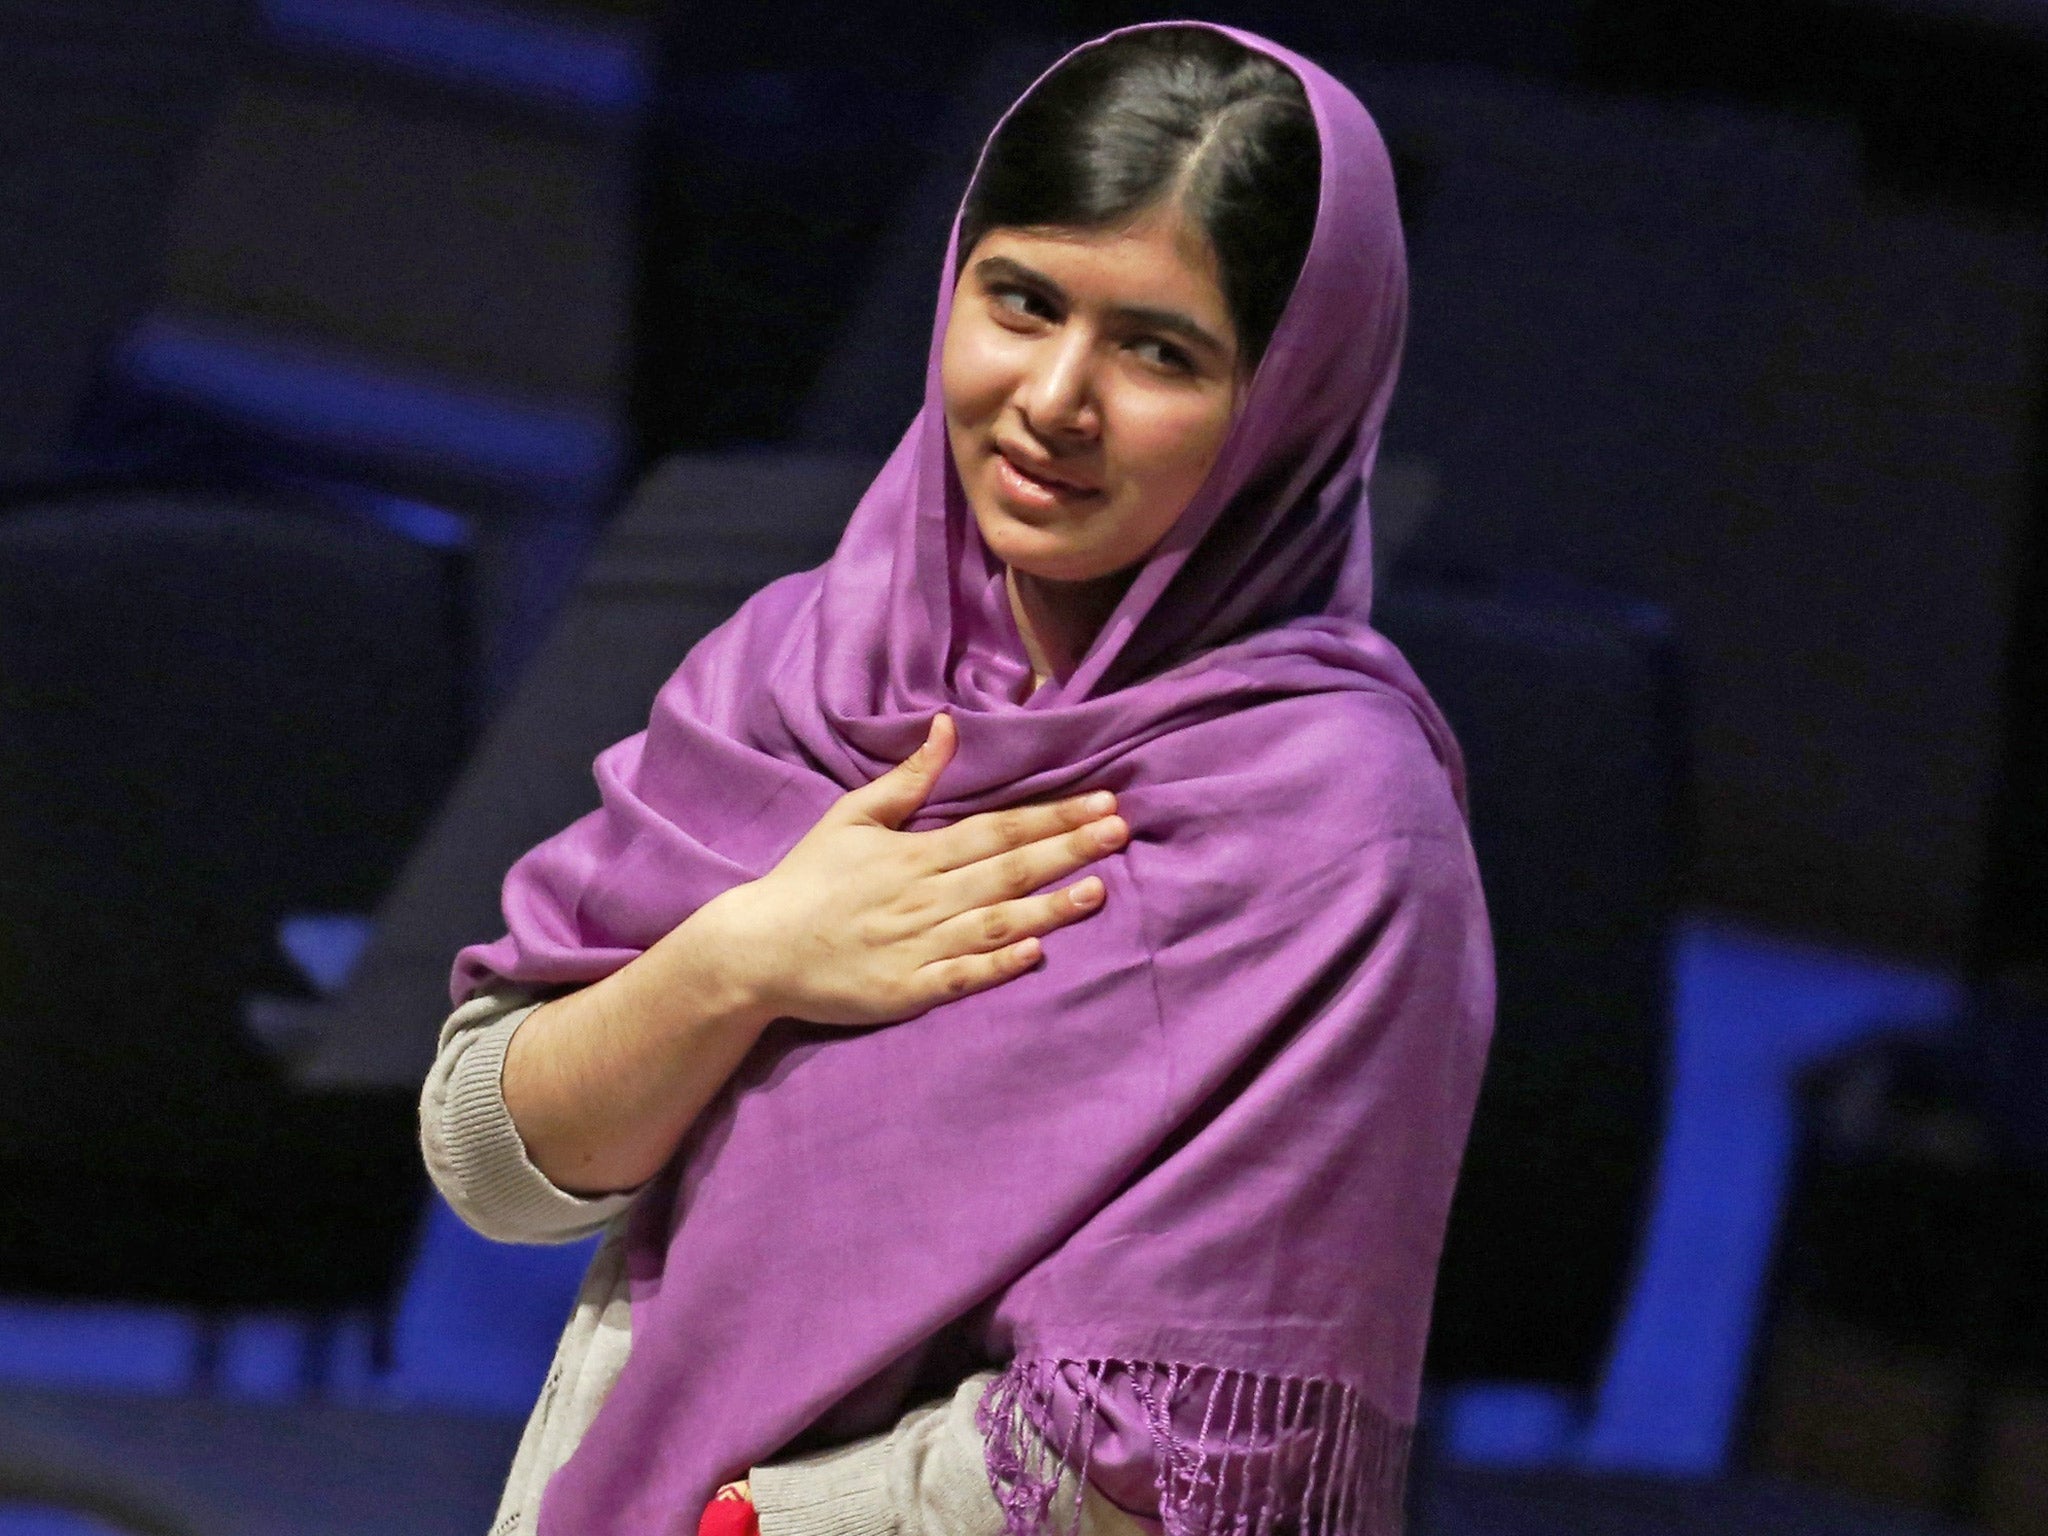 Malala Yousafzai speaks during the Women of the World Festival at the Southbank Centre in London